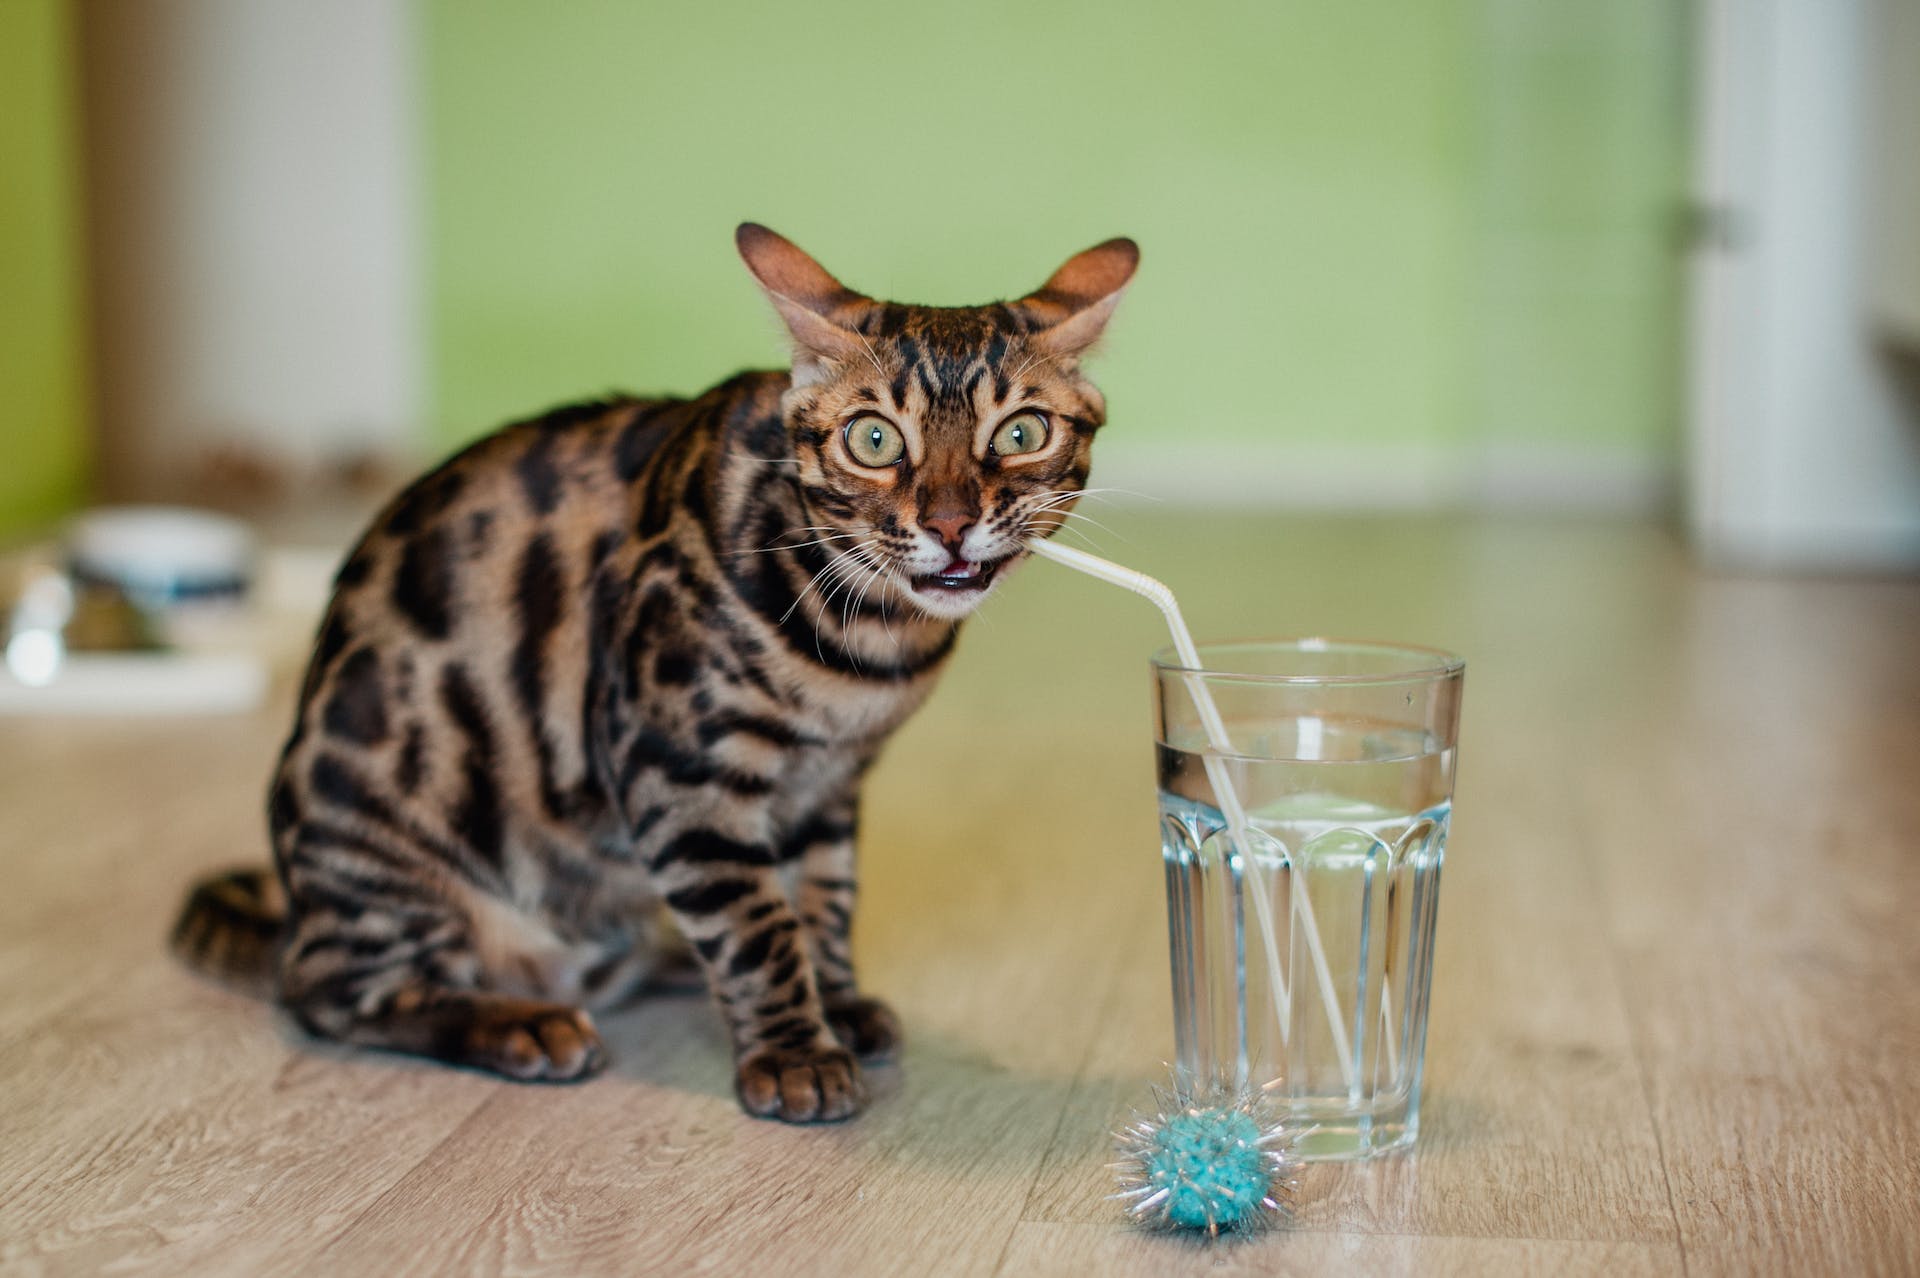 A Bengal cat drinking water out of a glass with a straw